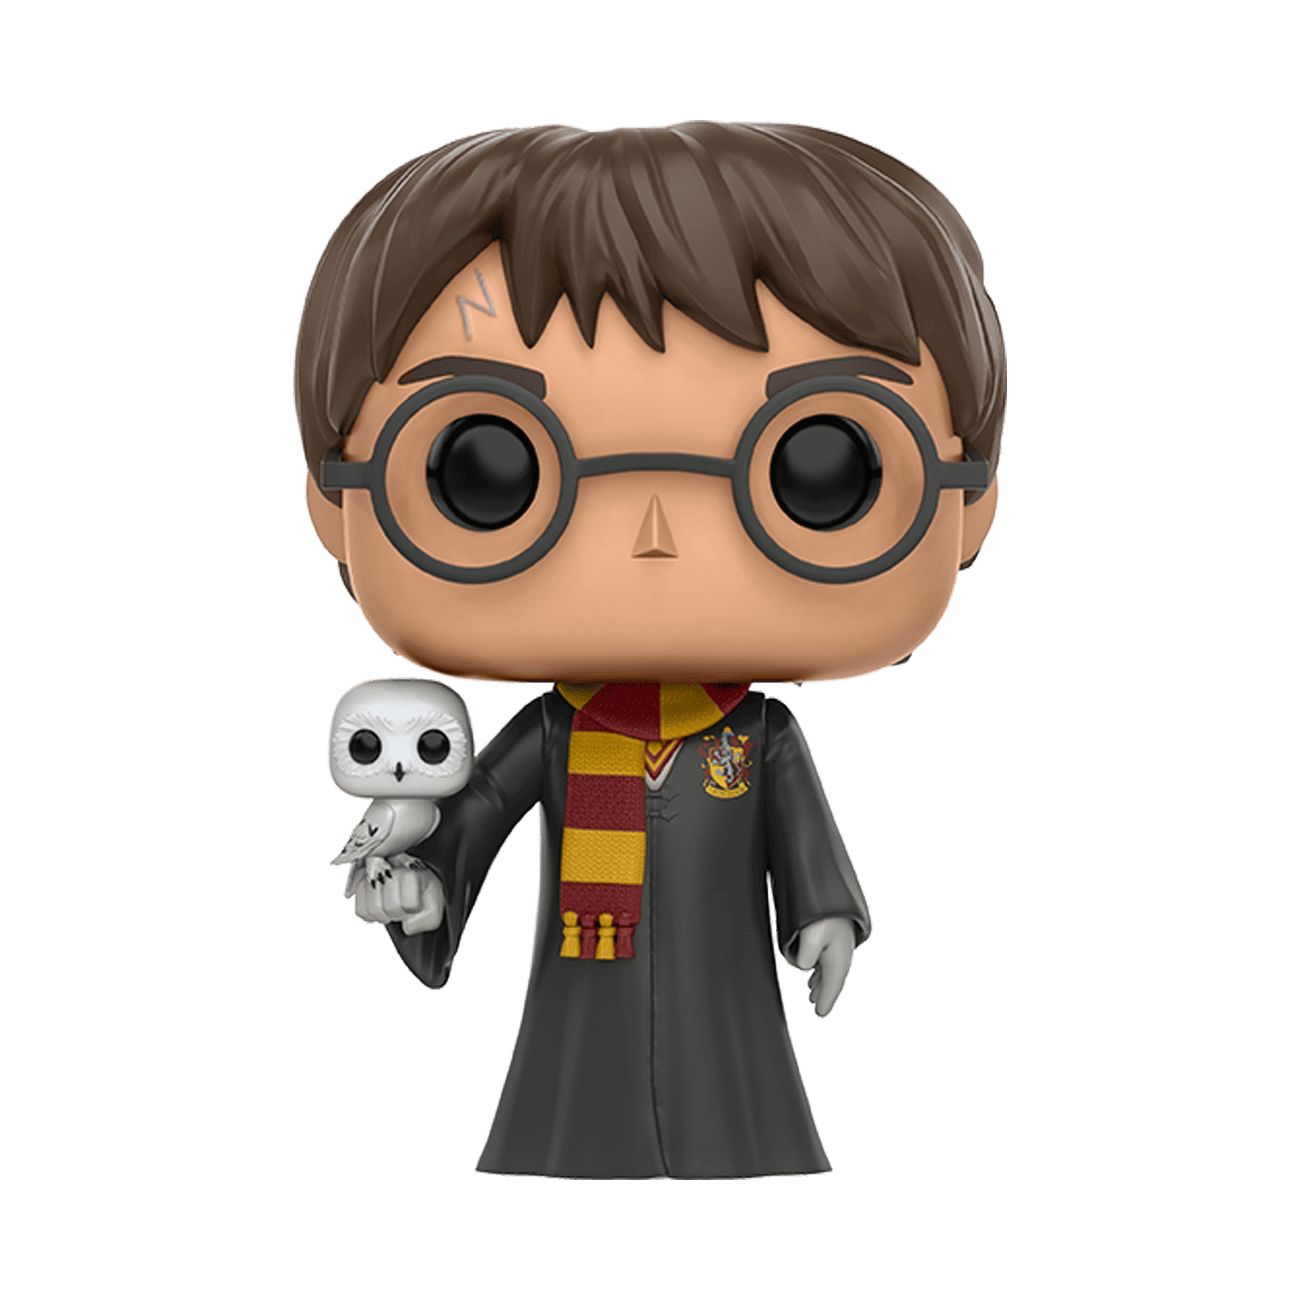 Buy Pop! Harry Potter Hedwig at Funko.